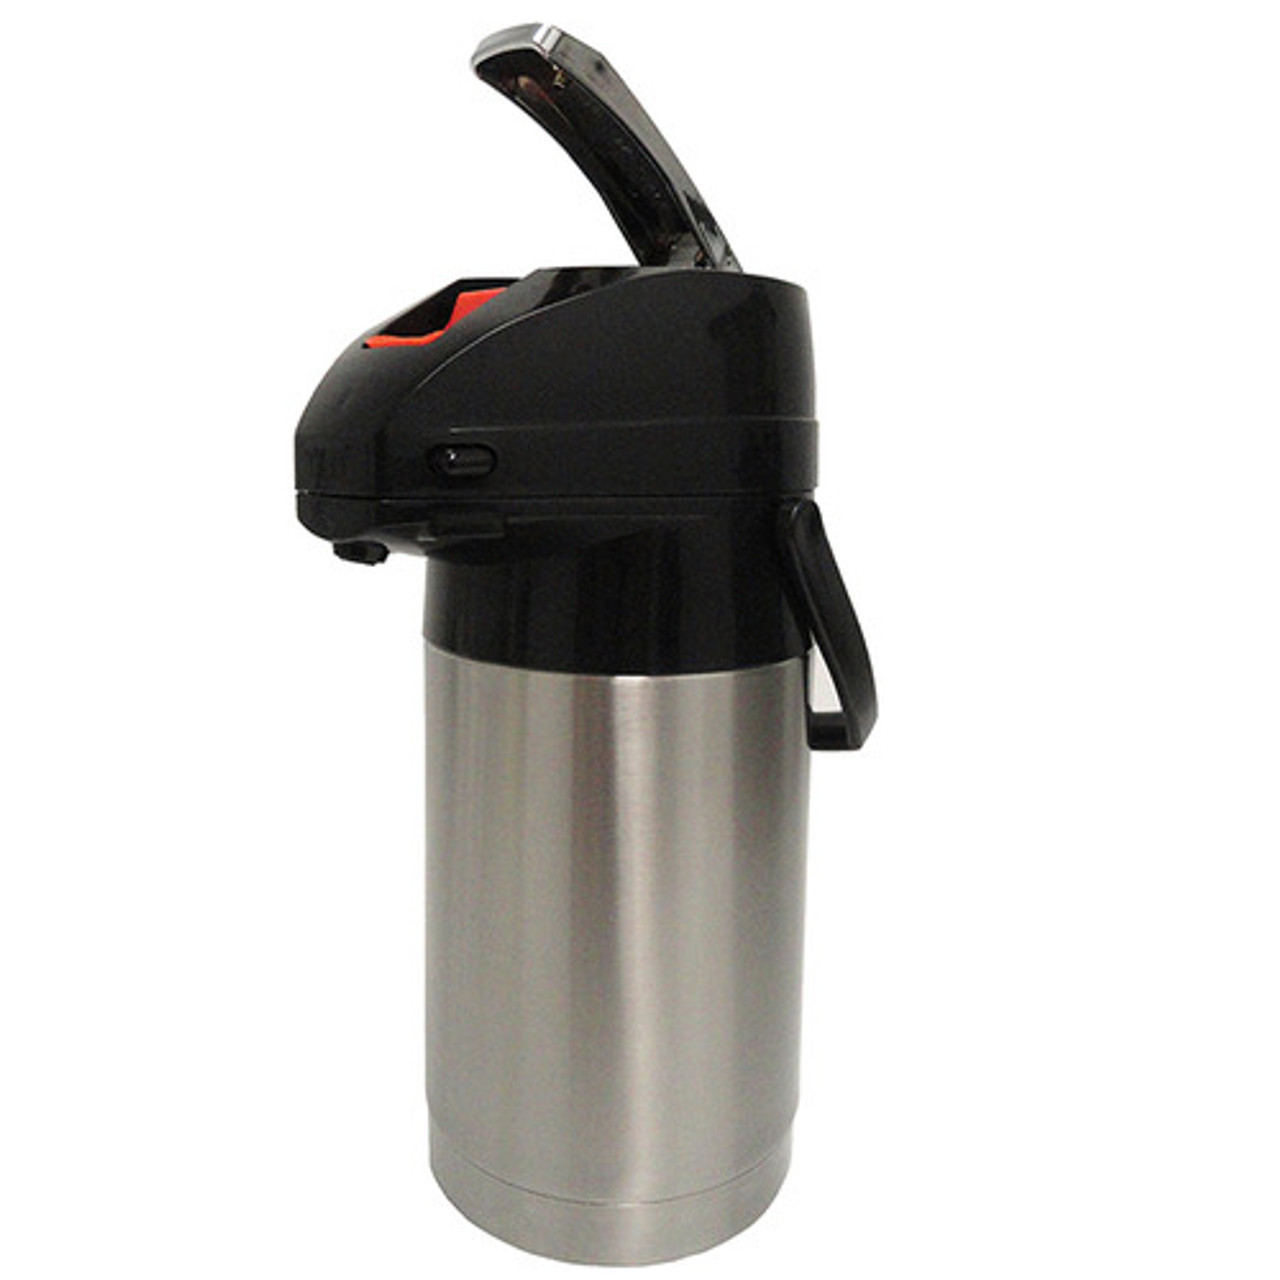 2.2 Liter Airpot Thermal Coffee Carafe Lever Action Stainless Steel Insulated